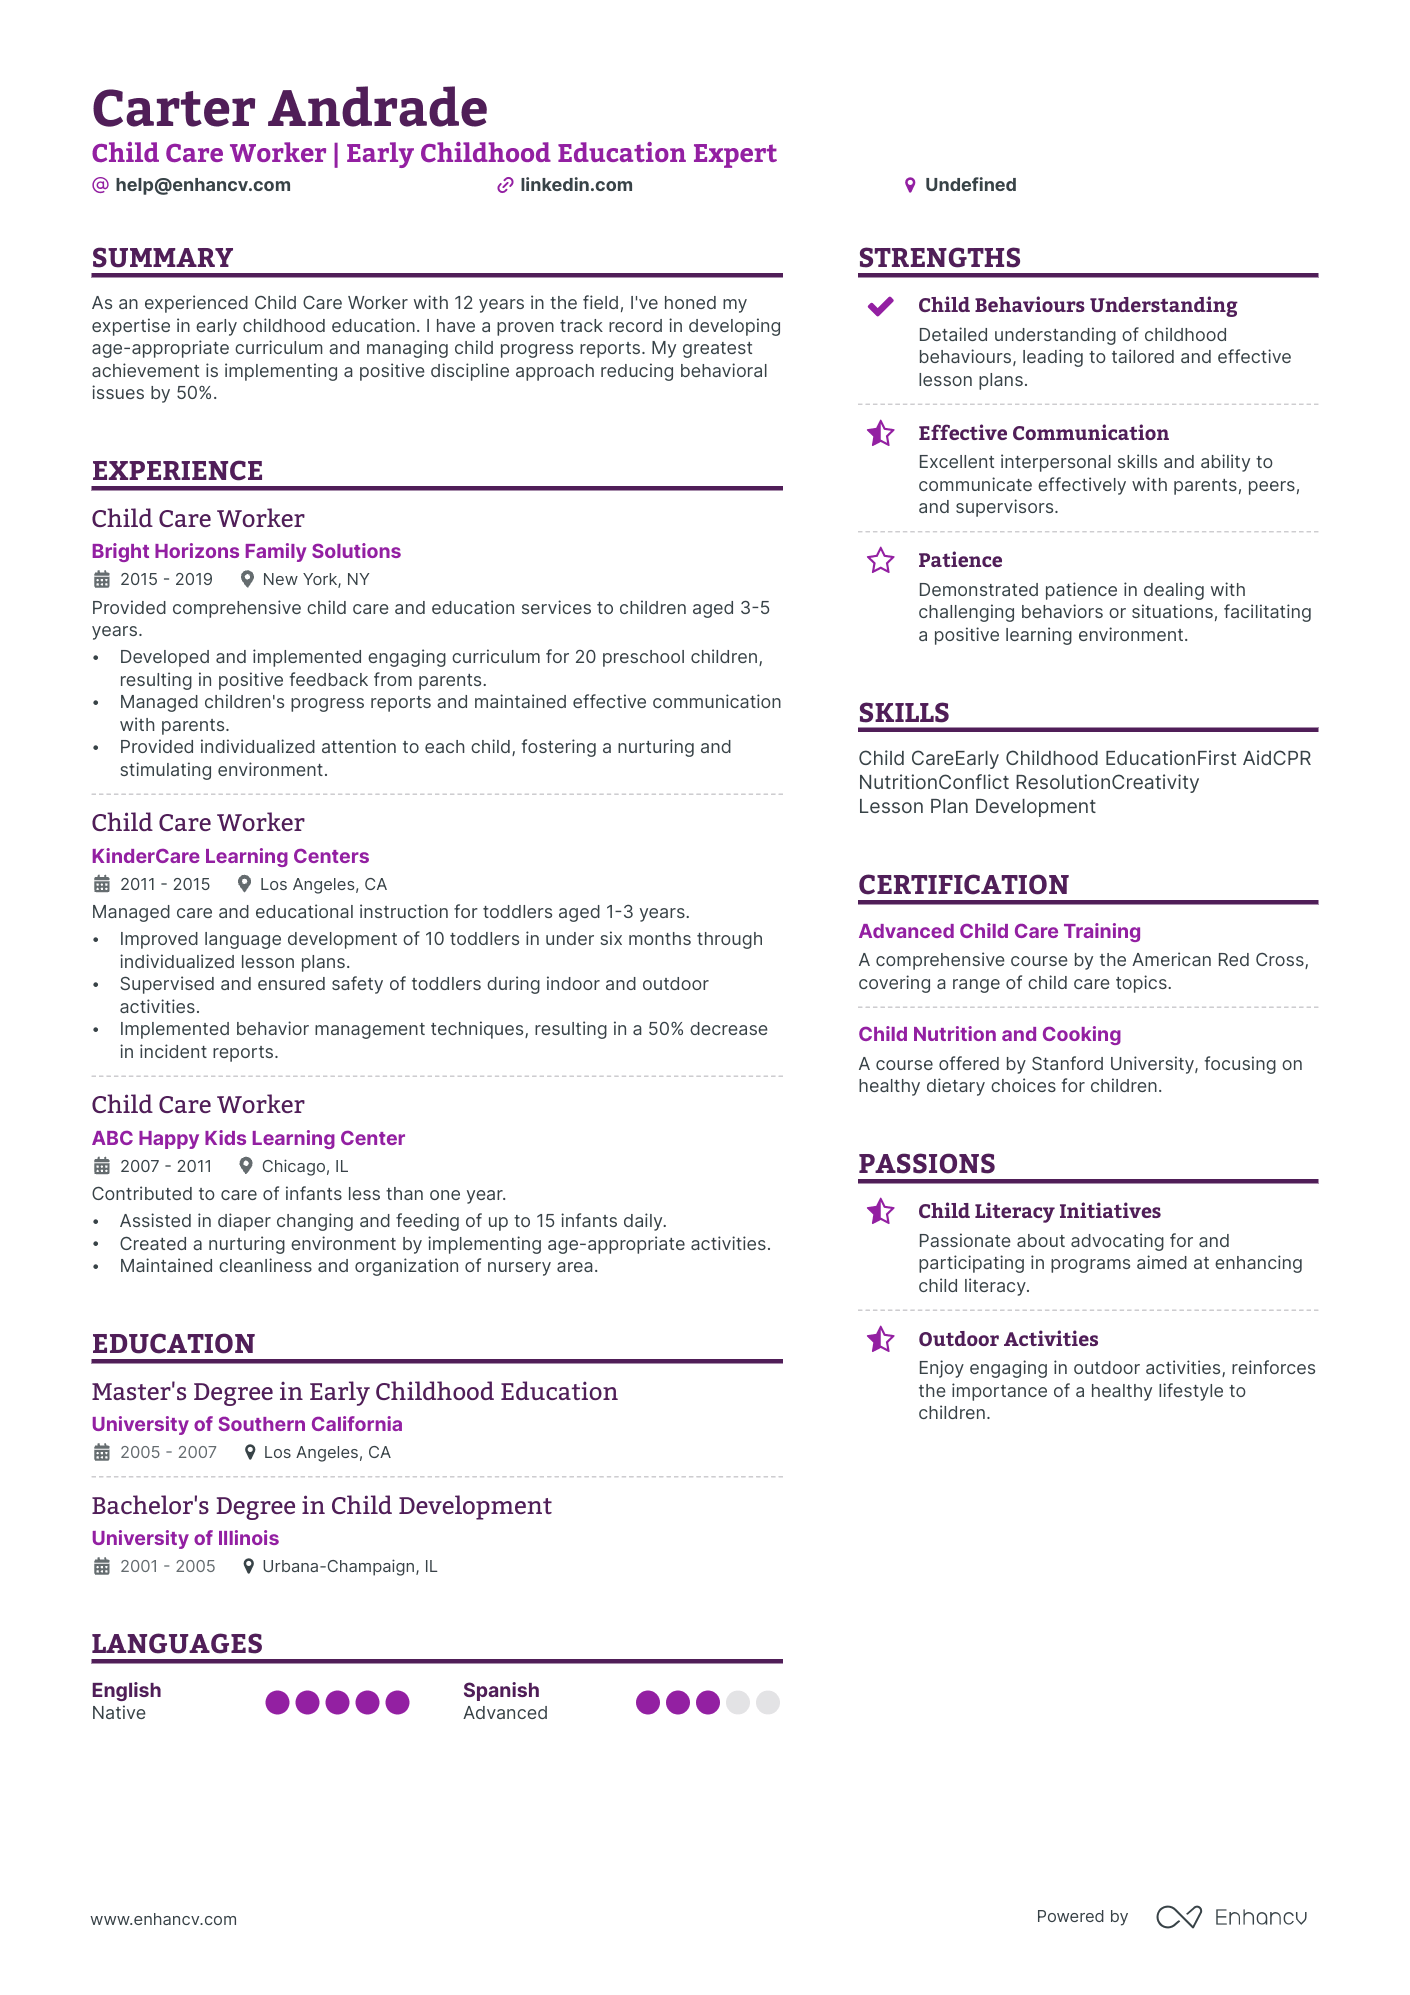 Child Care Worker resume example